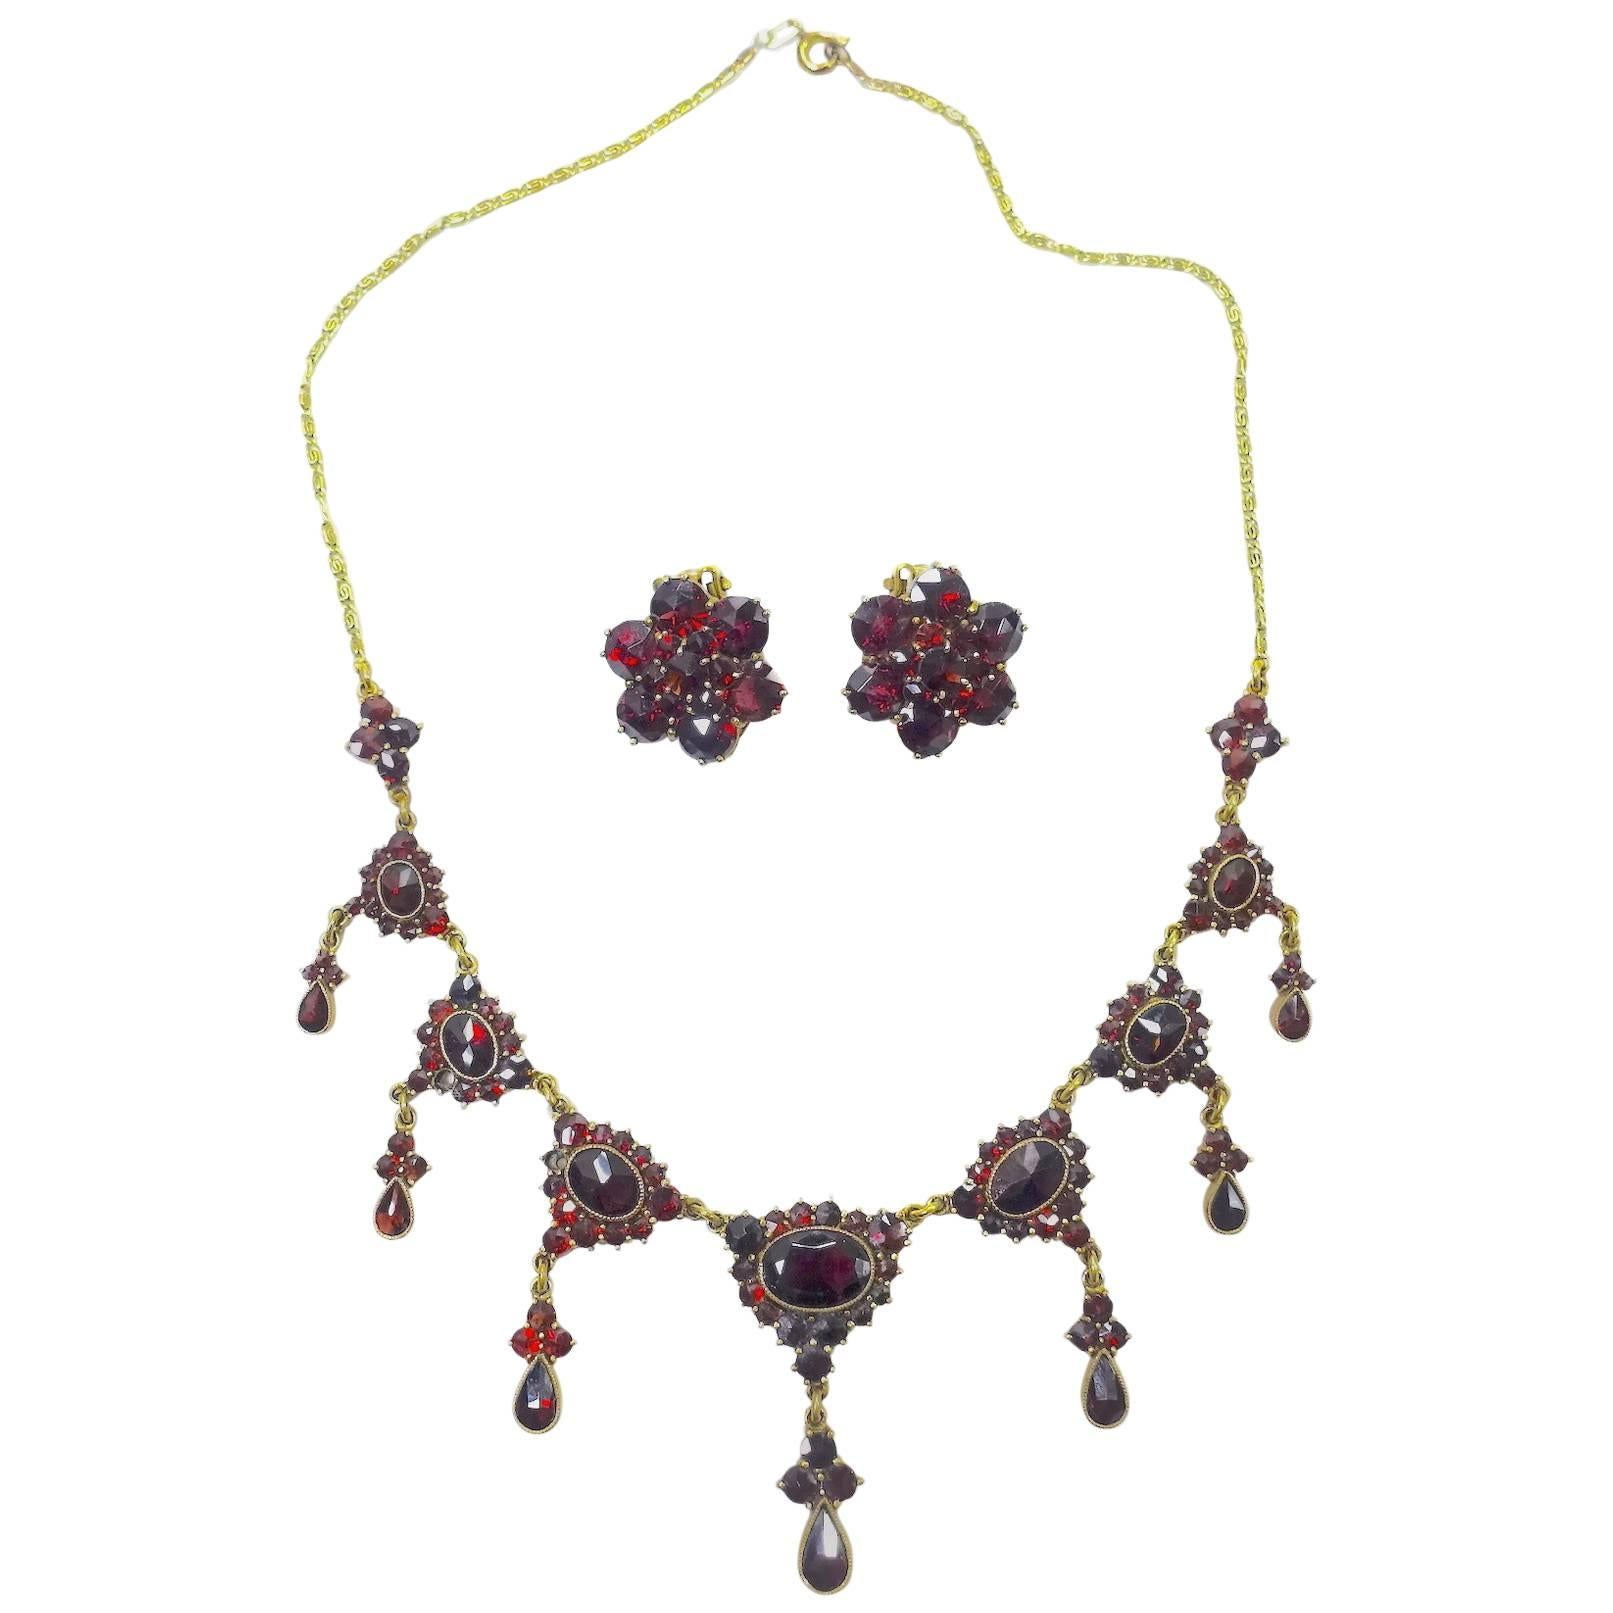 1920s Vintage Art Deco Garnet Gold Necklace and Earrings